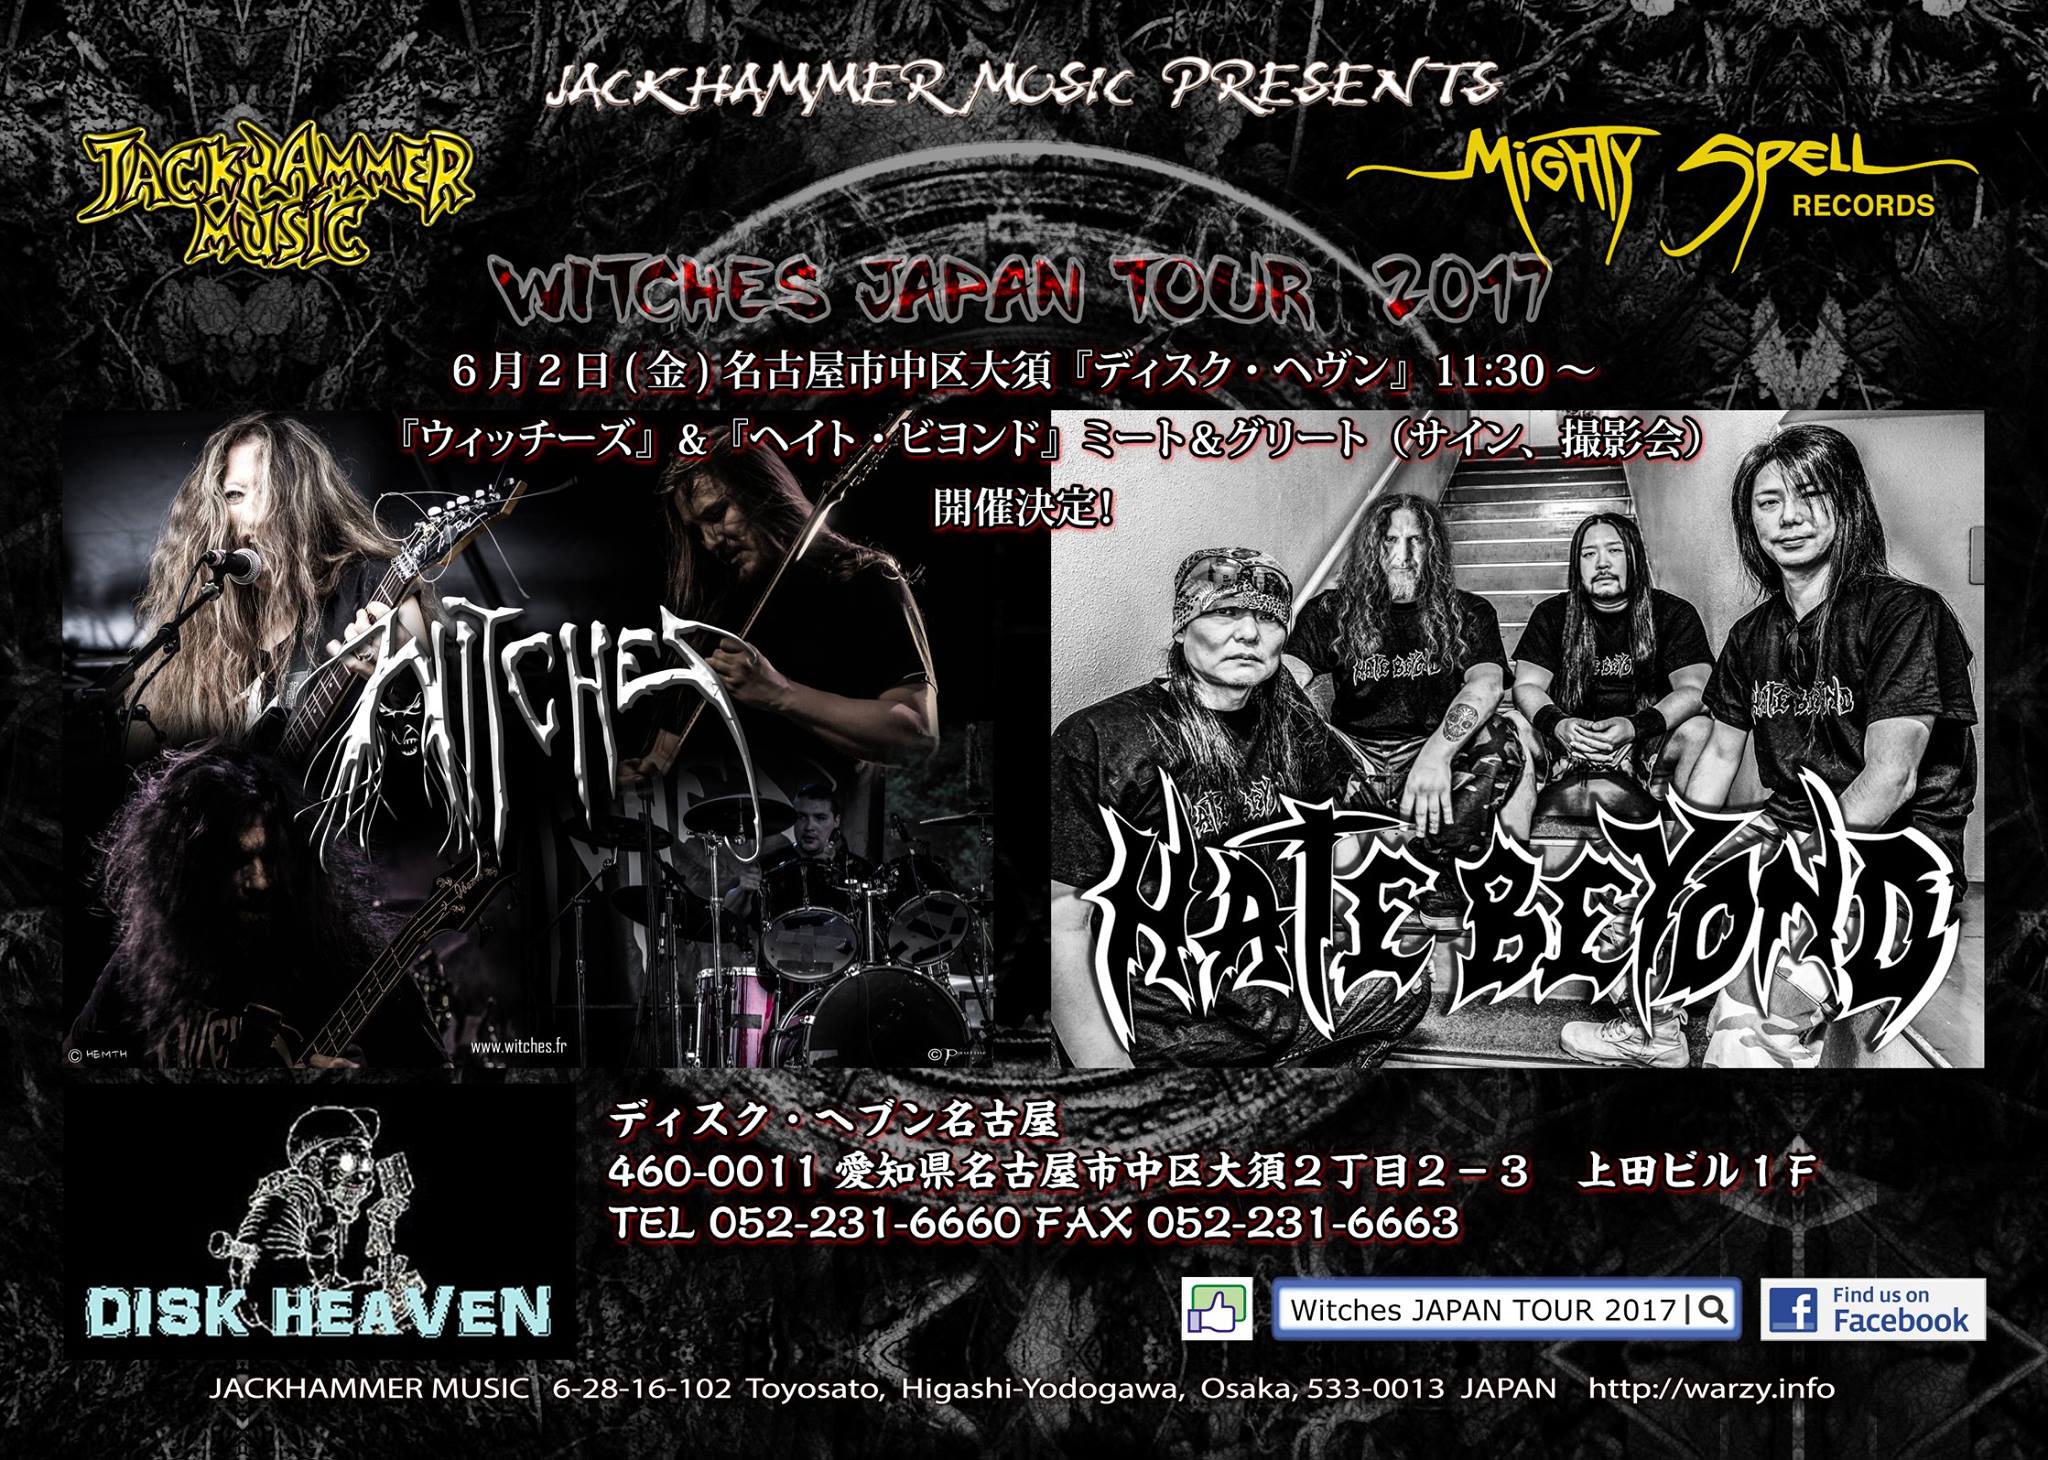 Witches flyer WITCHES and HATE BEYOND Autograph & photo session etc... at DISK HEAVEN NAGOYA!! @ Meet & greet at 